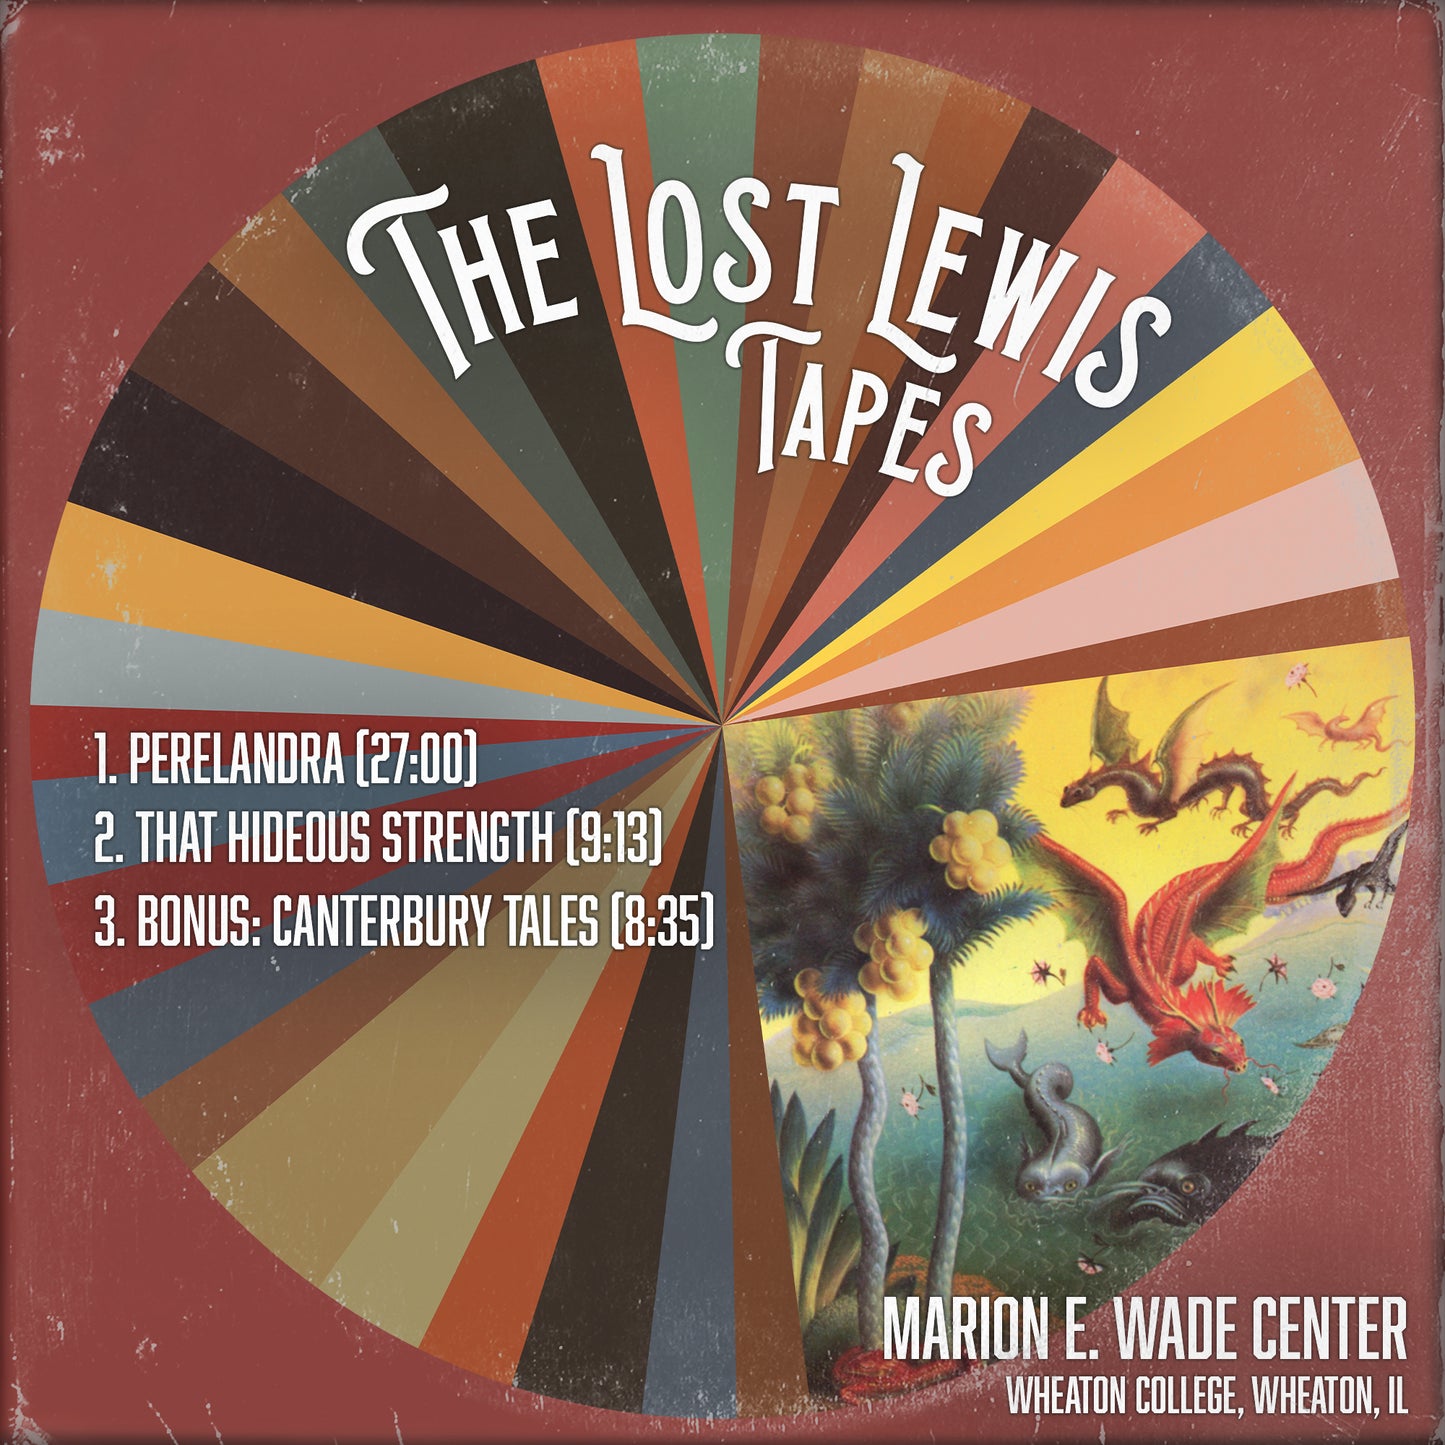 The Lost Lewis Tapes